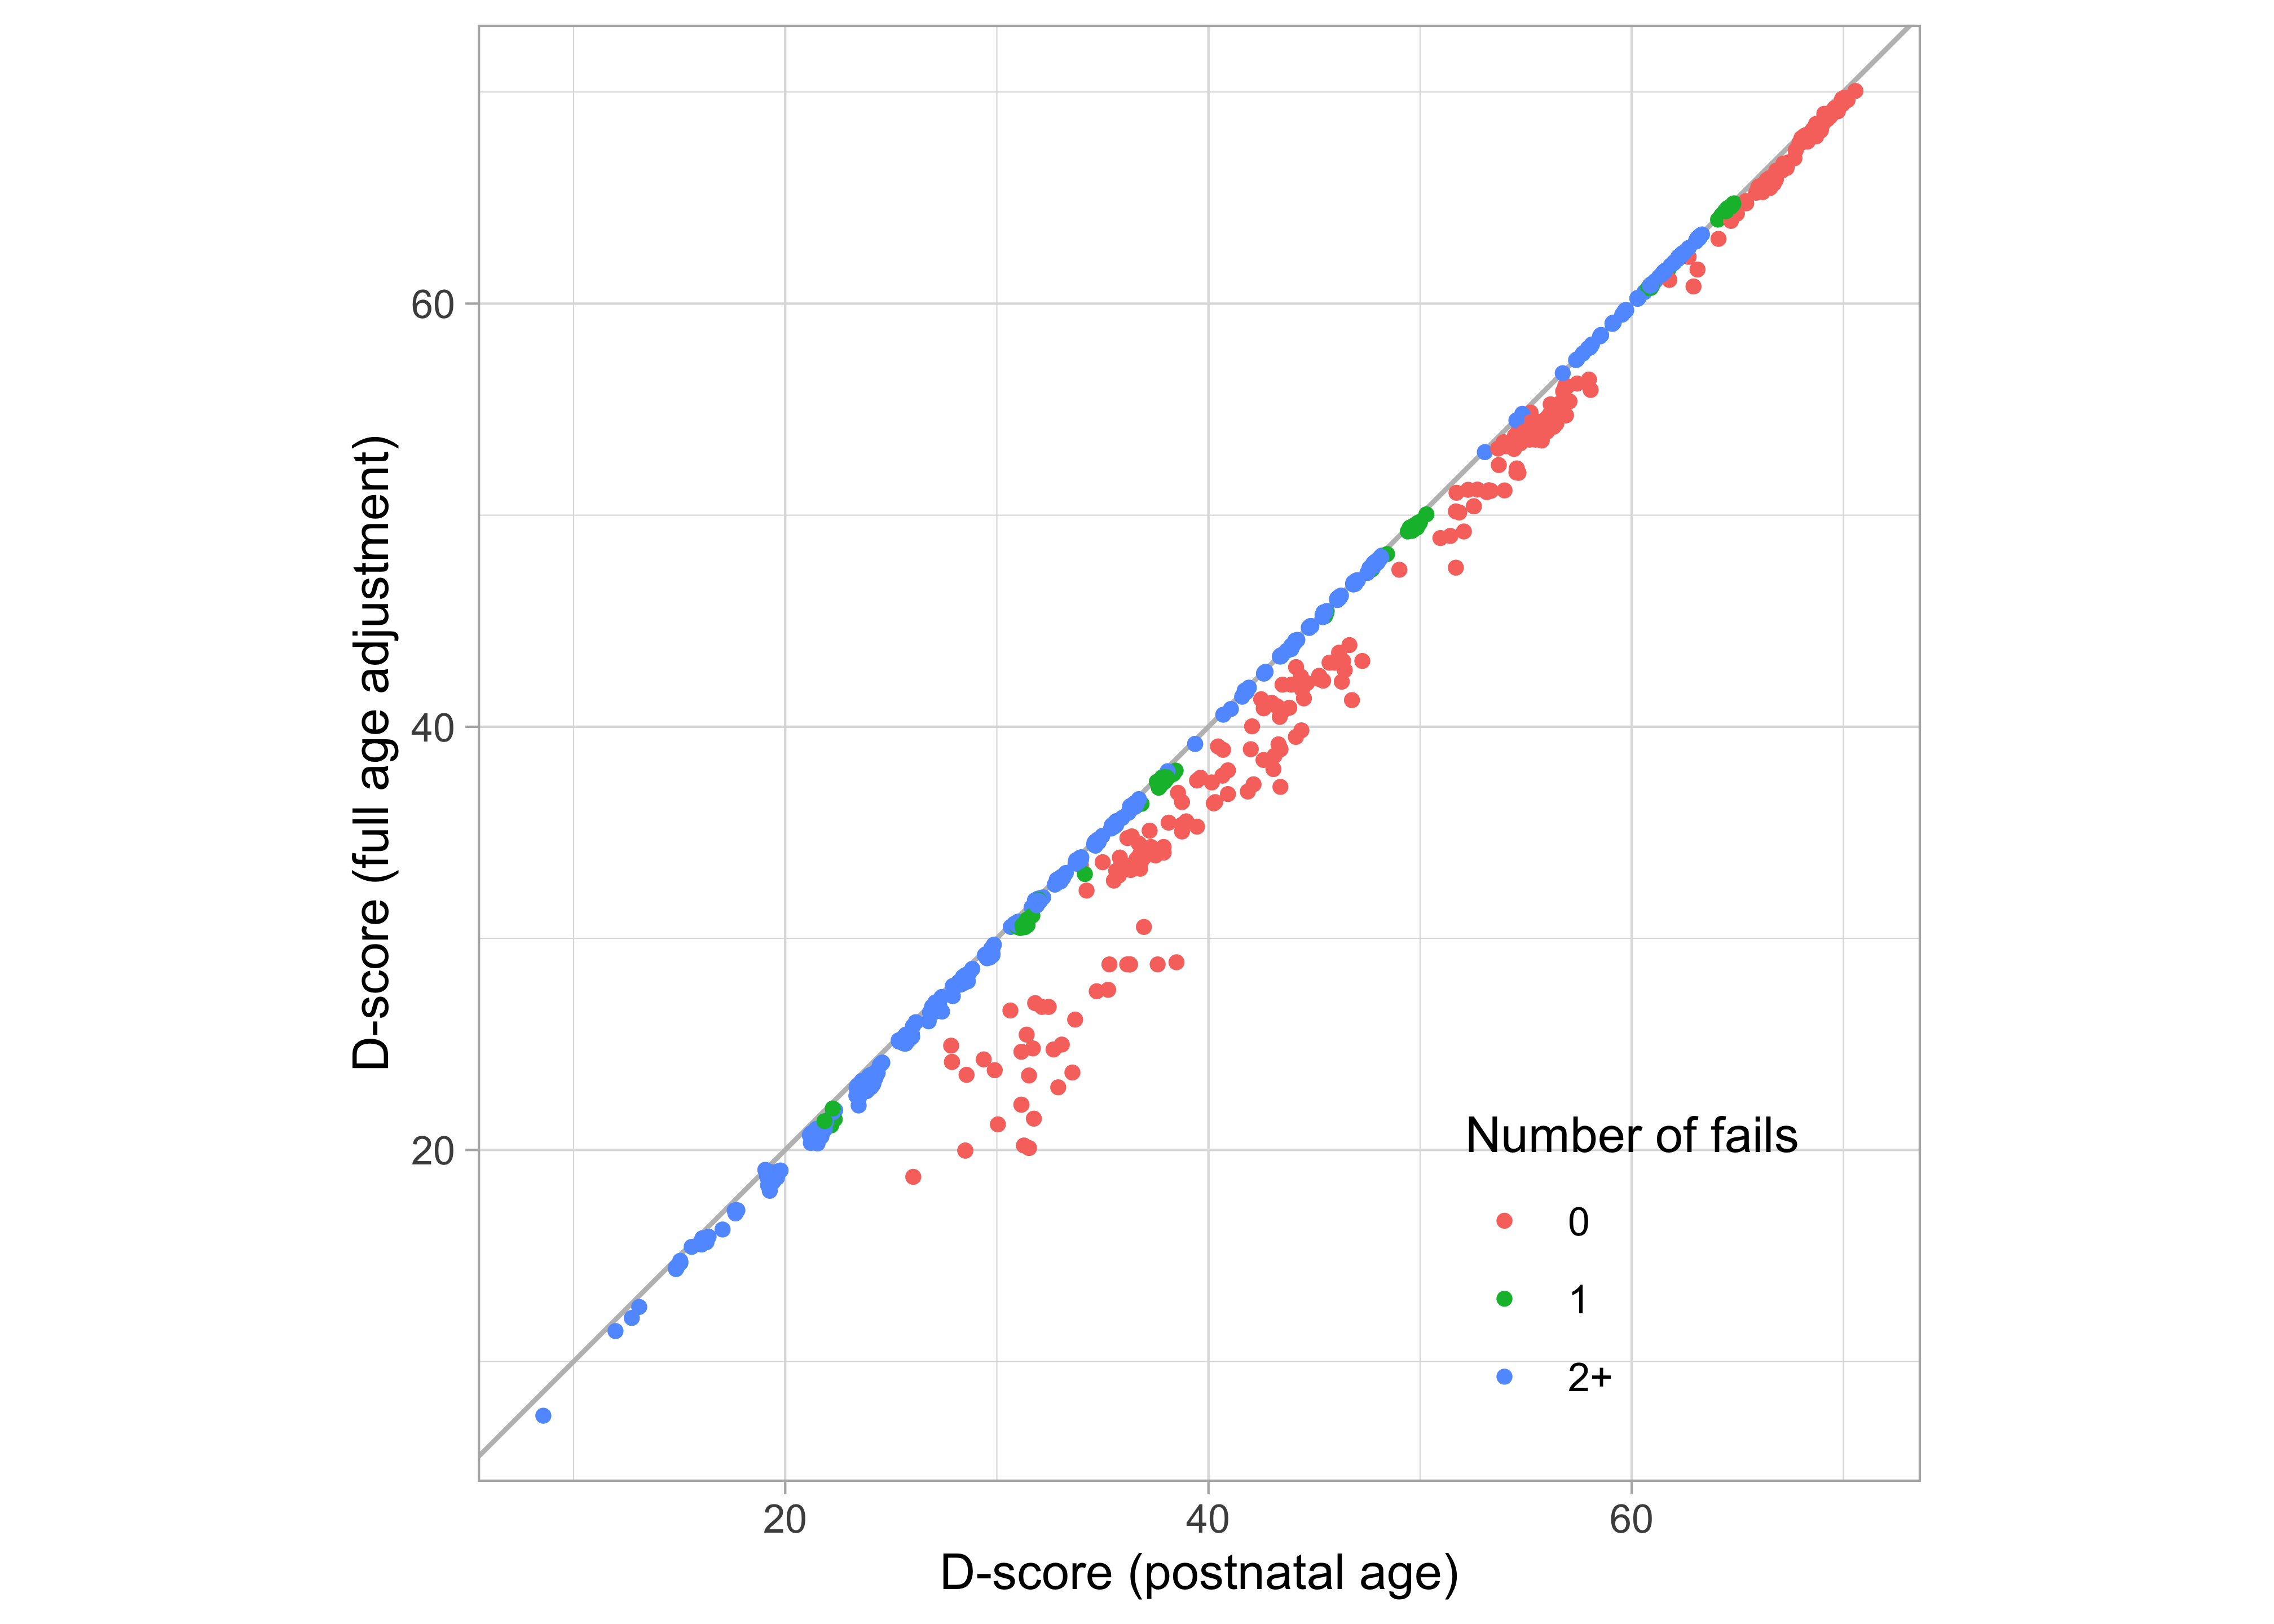 Scatterplot of two versions of the D-score, one calculated using postnatal age (\(f = 0.00\)), the other calculated using full age-adjustment (\(f = 1.00\)).